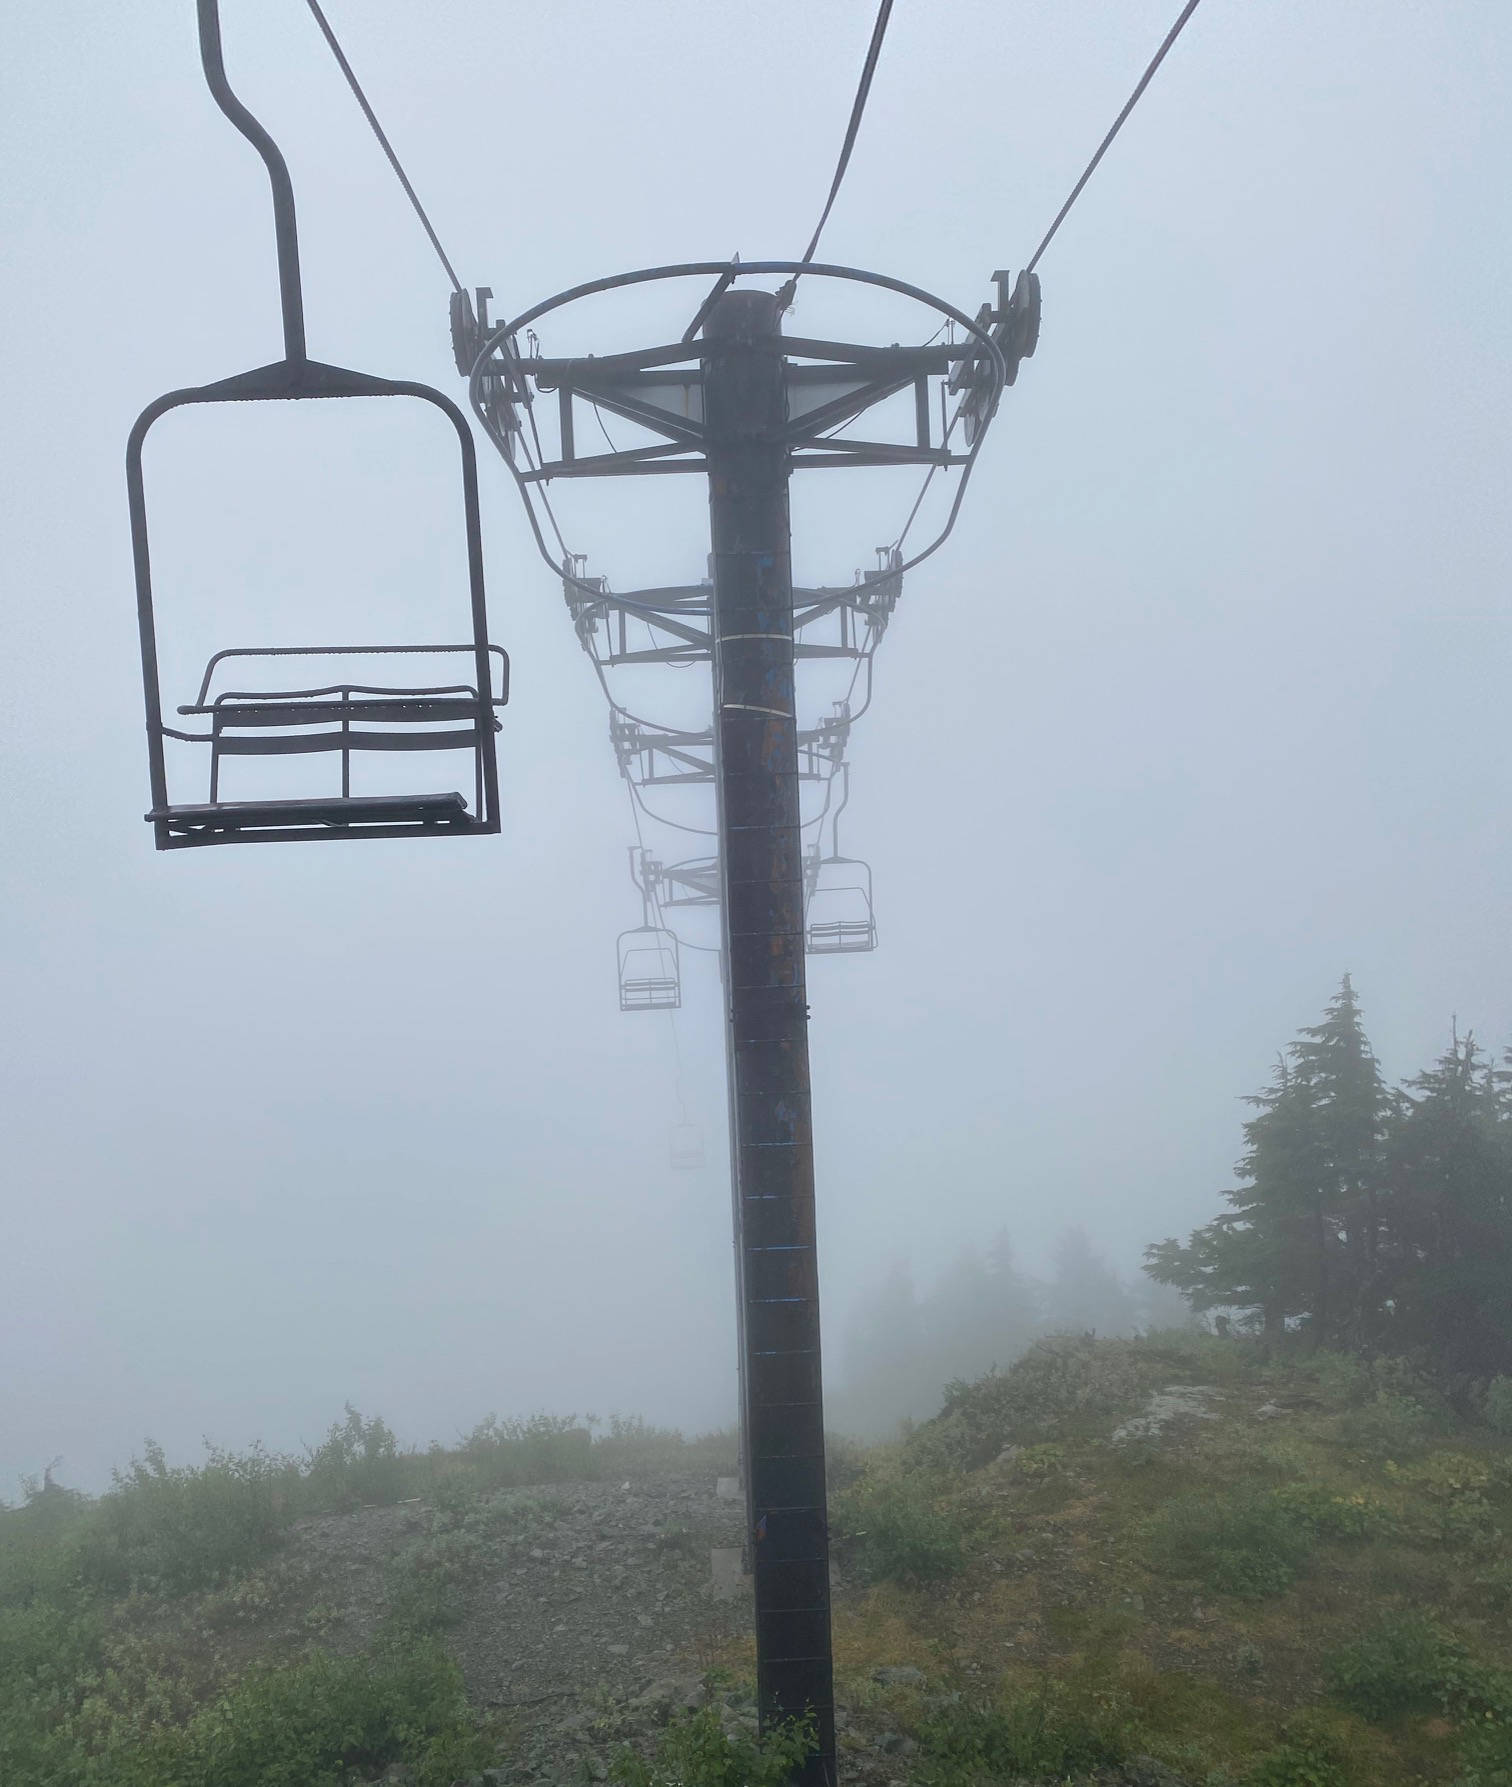 The Black Bear chairlift disappears into the thickening fog on Sept. 2, 2020. (Courtesy Photo / Denise Carroll)